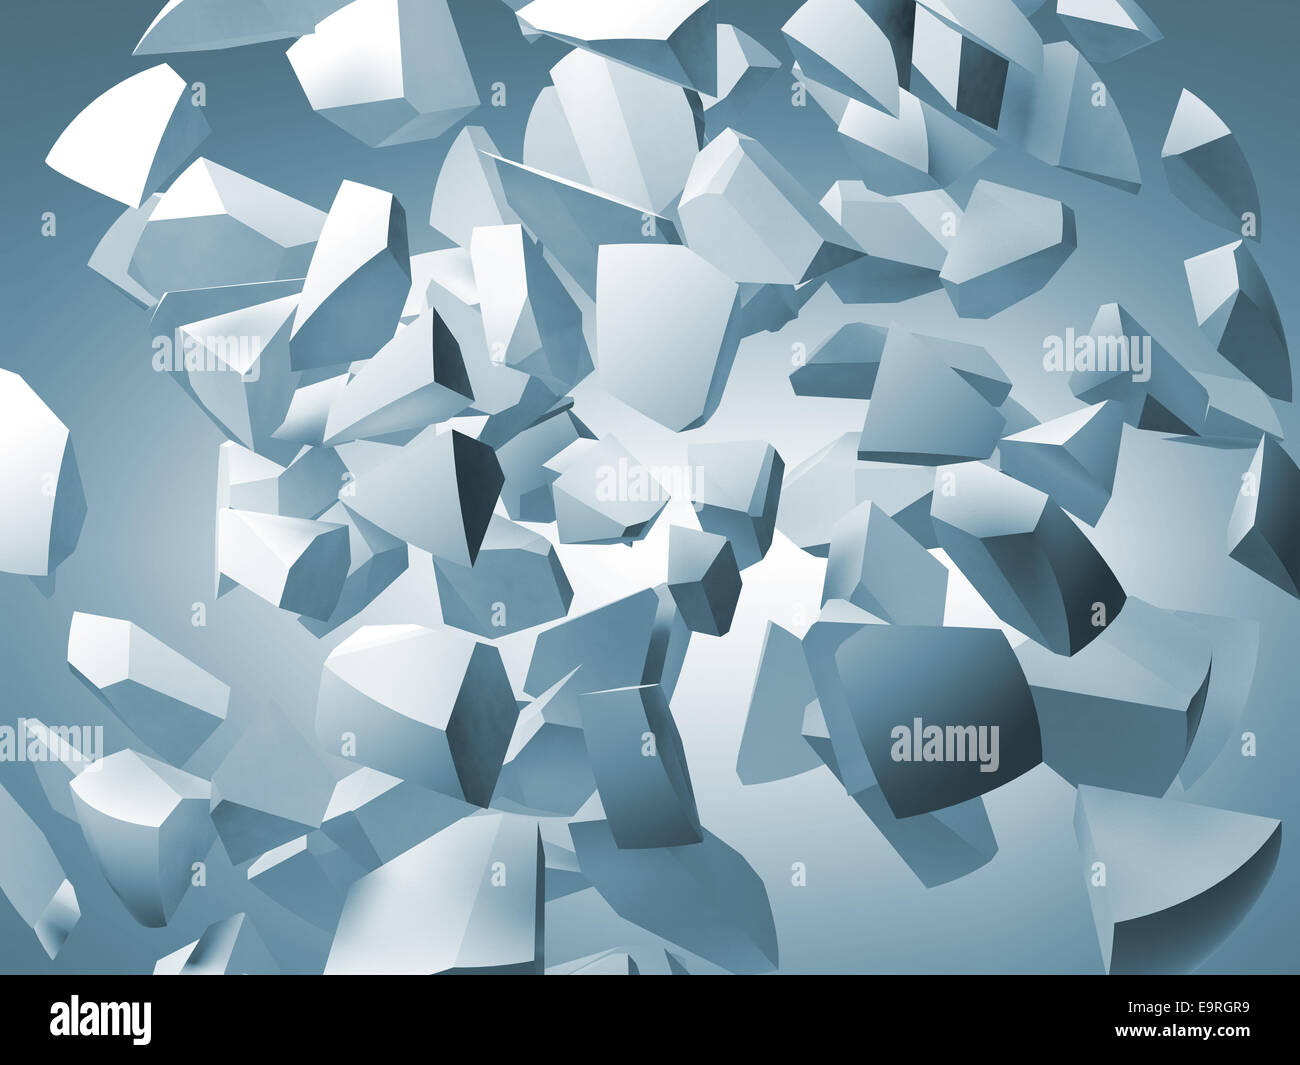 Abstract 3d illustration with flying white fragments of big sphere on blue background Stock Photo